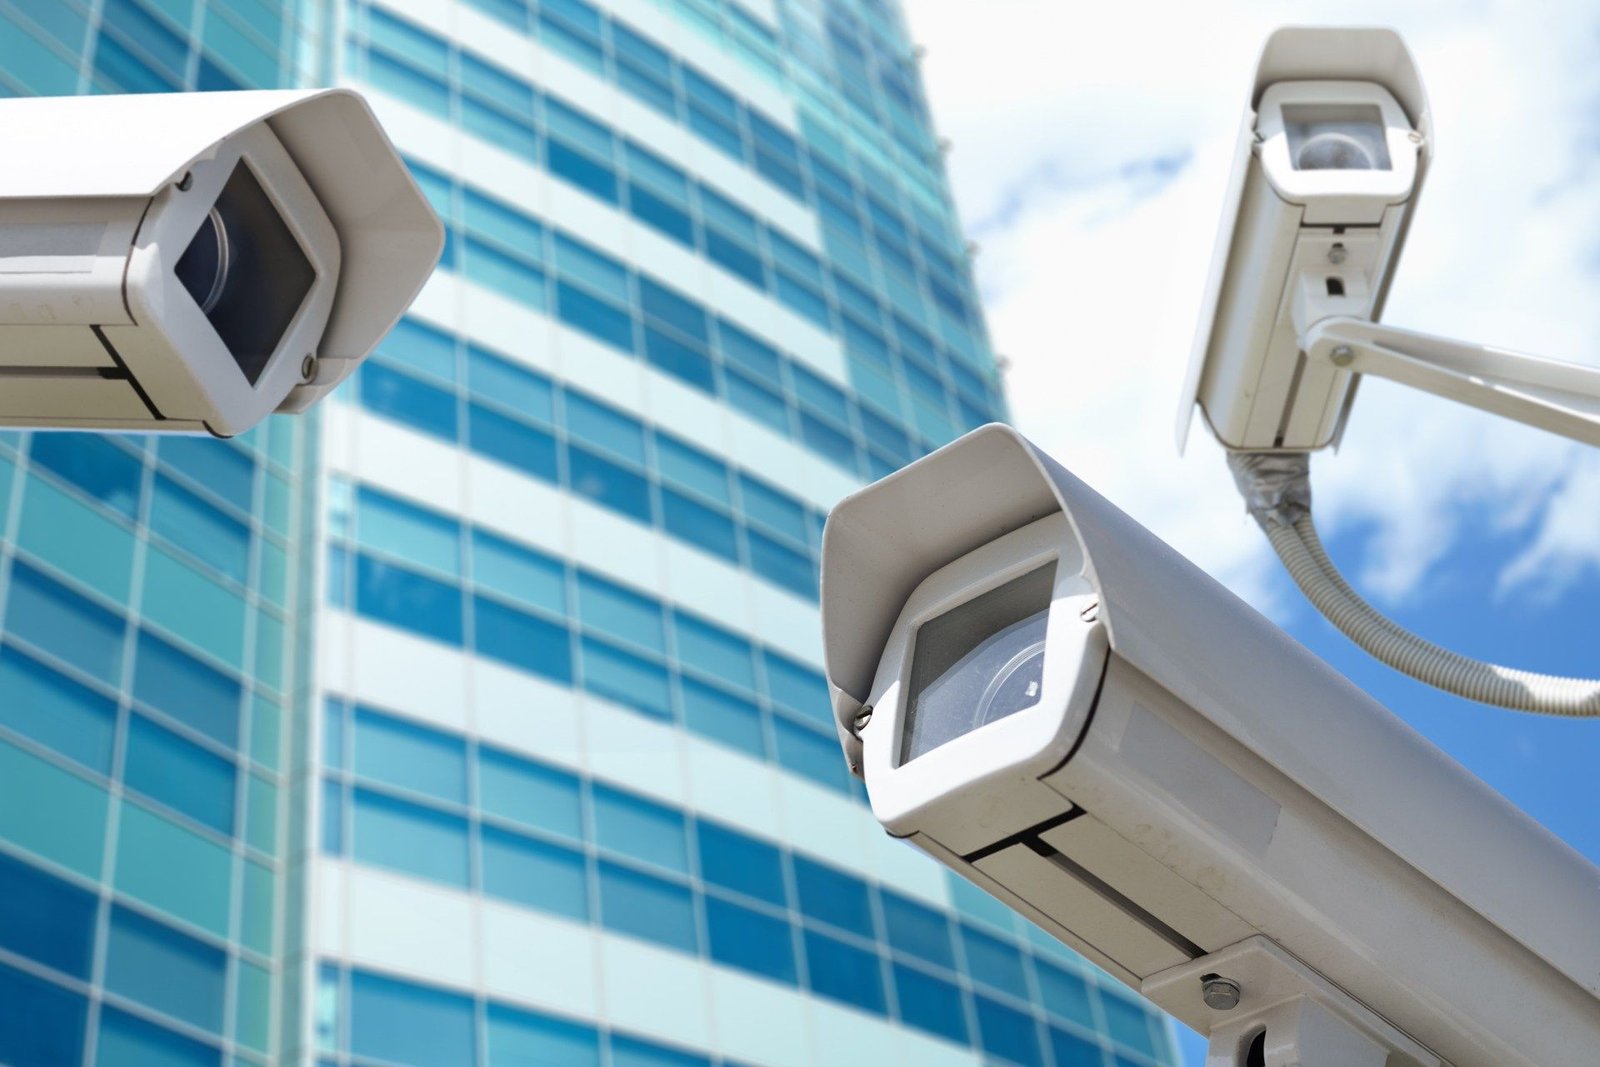 How Effective are CCTV Cameras in Deterring Crime?